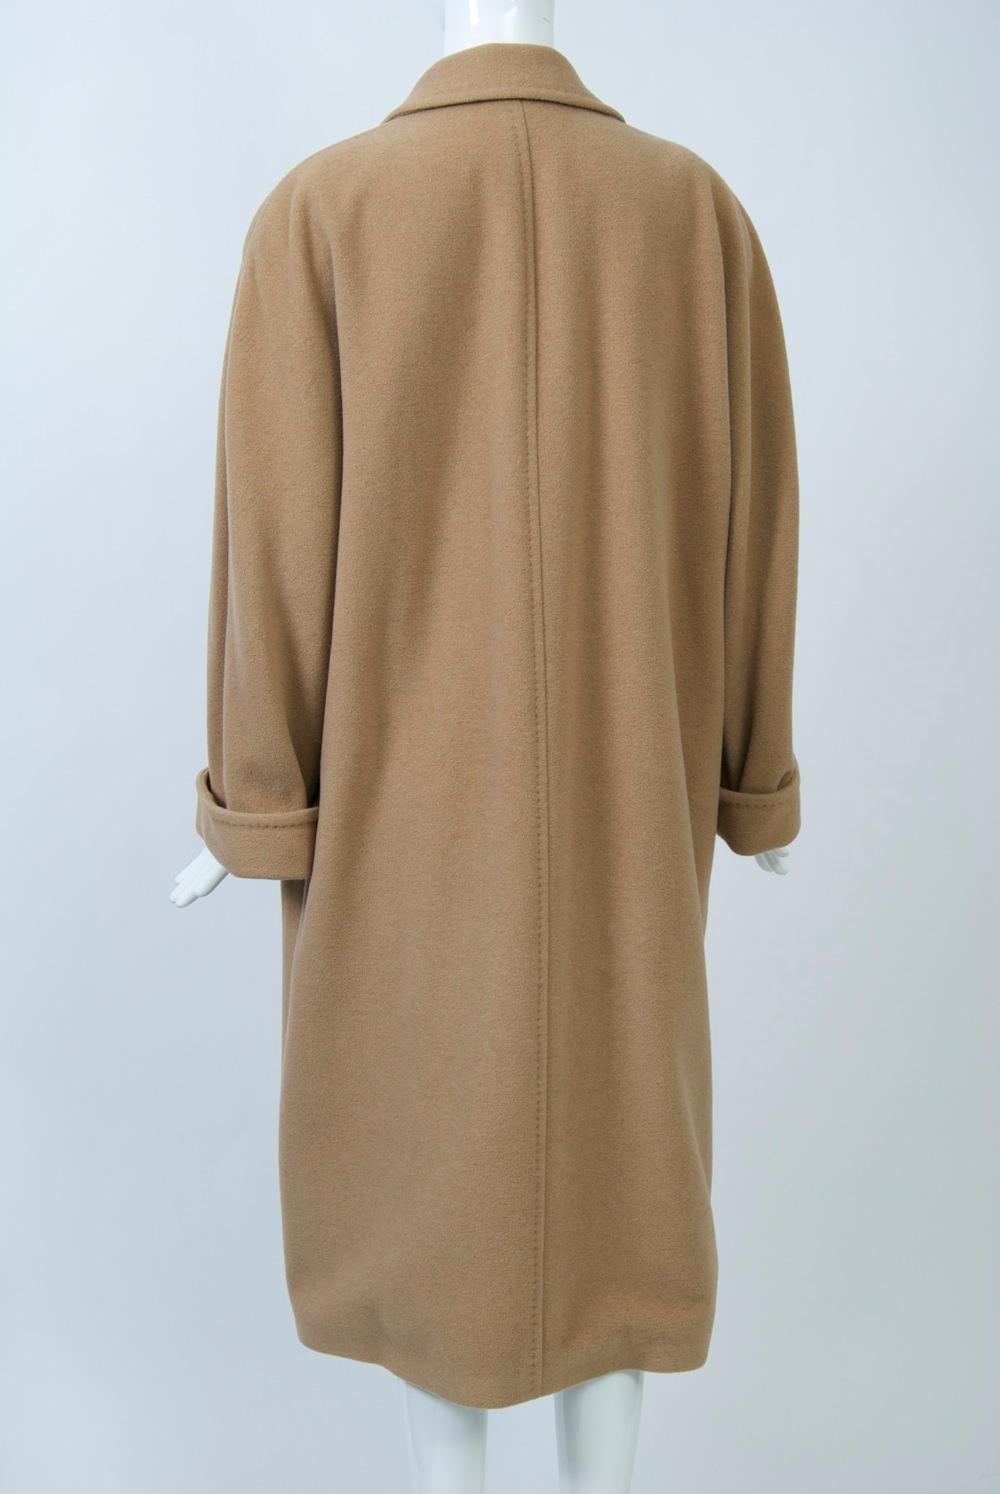 1990s Camelhair Coat In Good Condition For Sale In Alford, MA